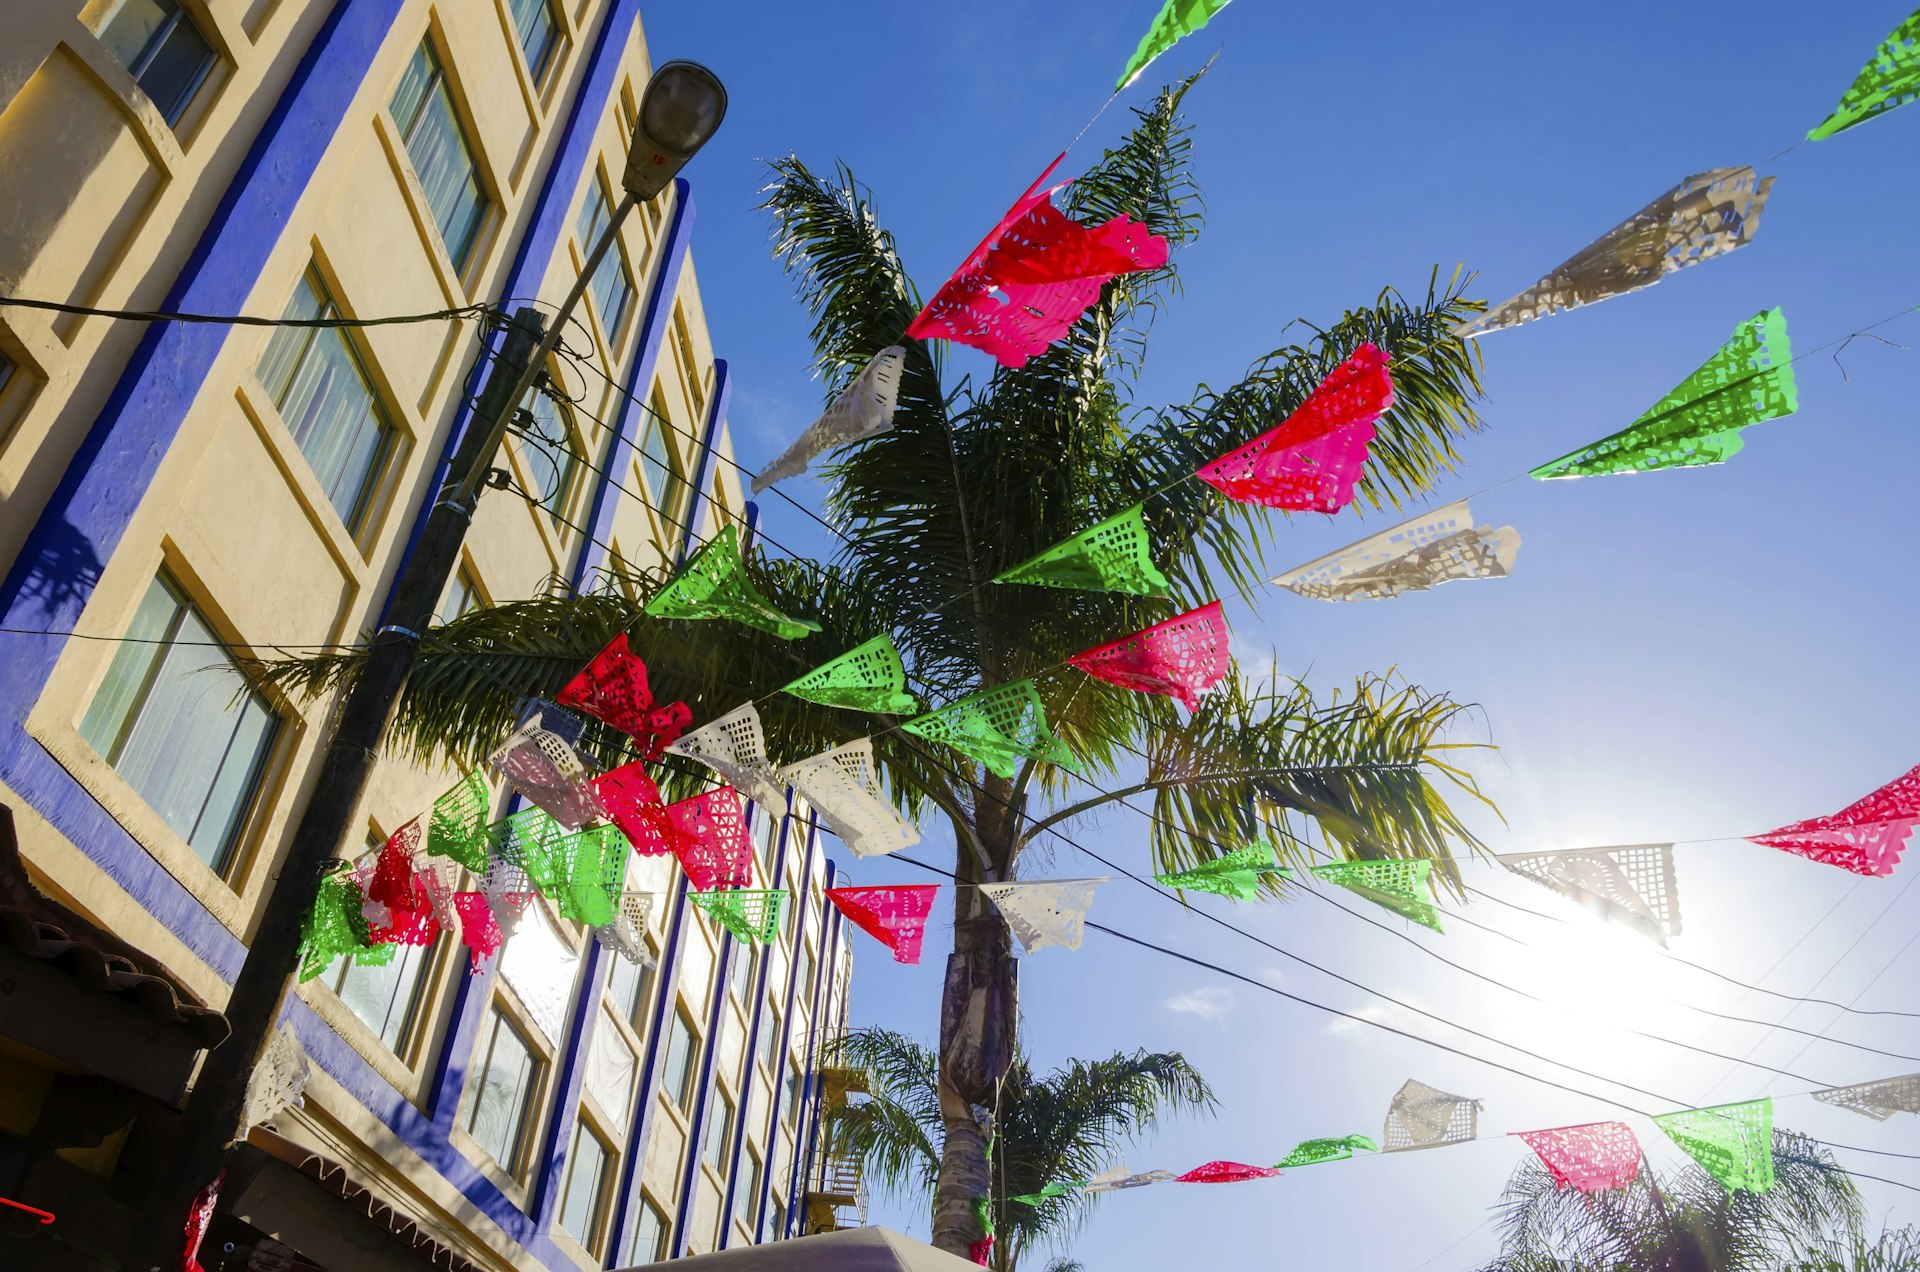 Red, green and white flags fly with a palm tree and building in the background